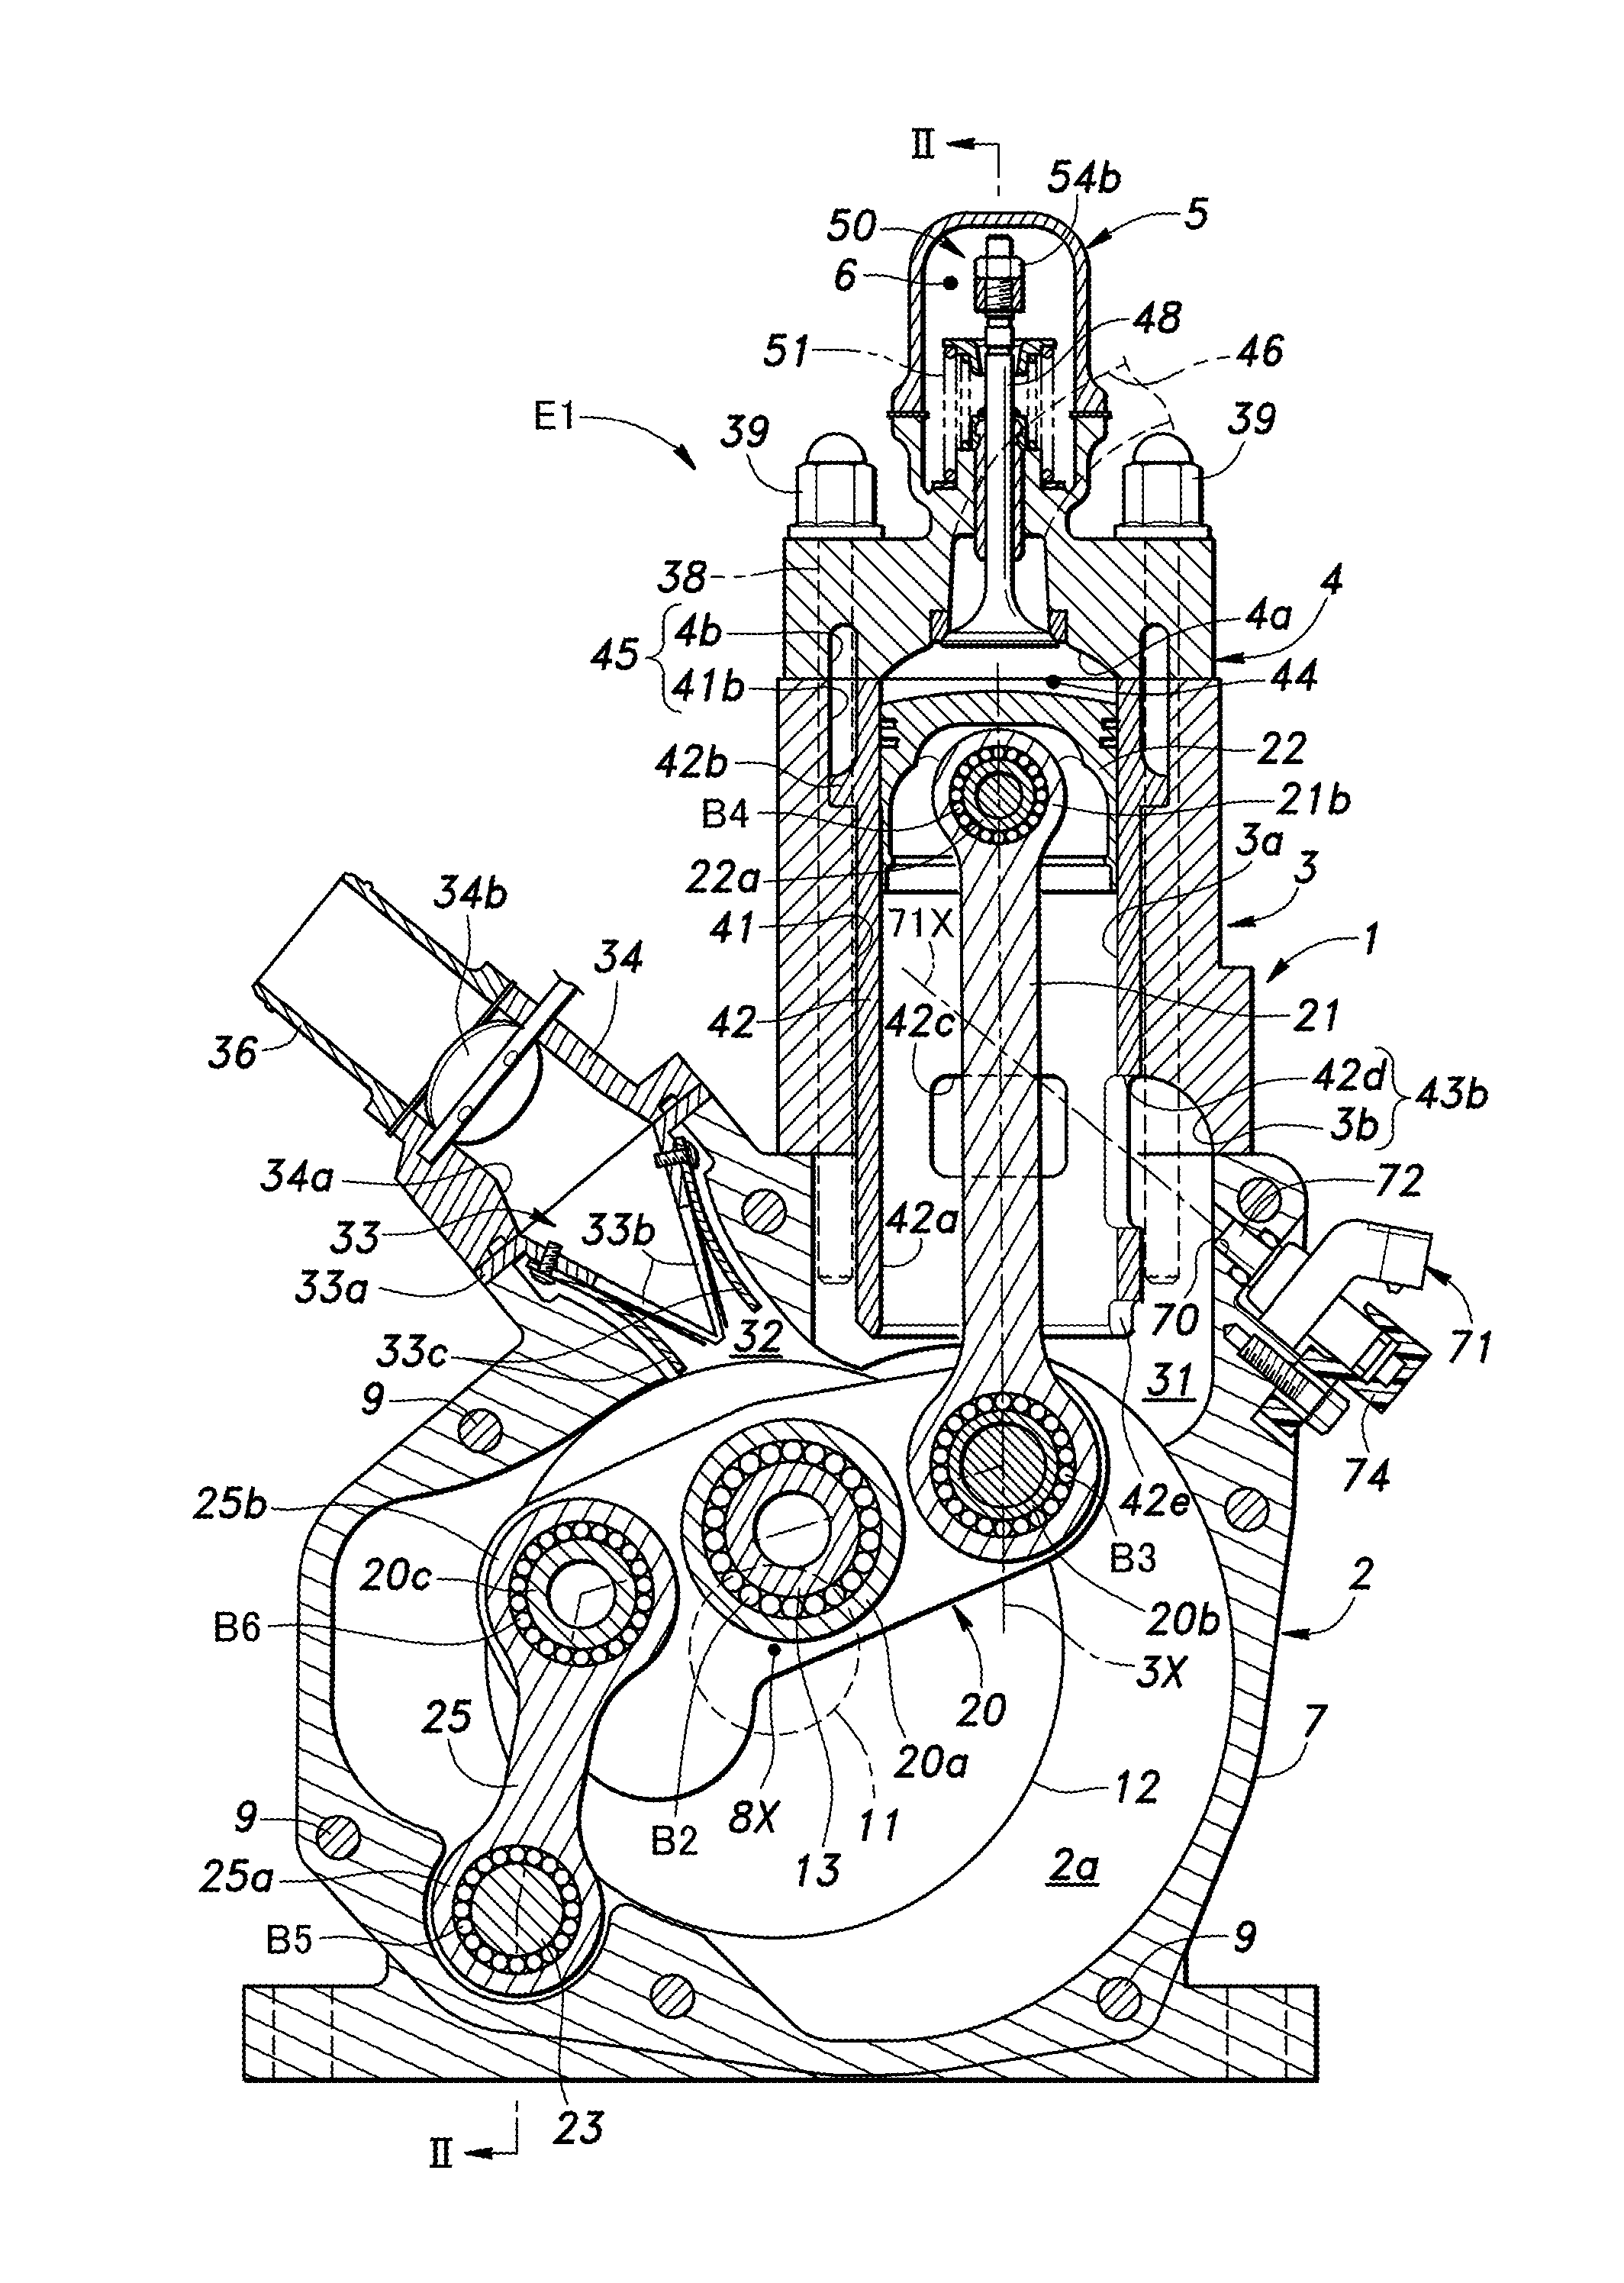 Two-stroke engine with fuel injection